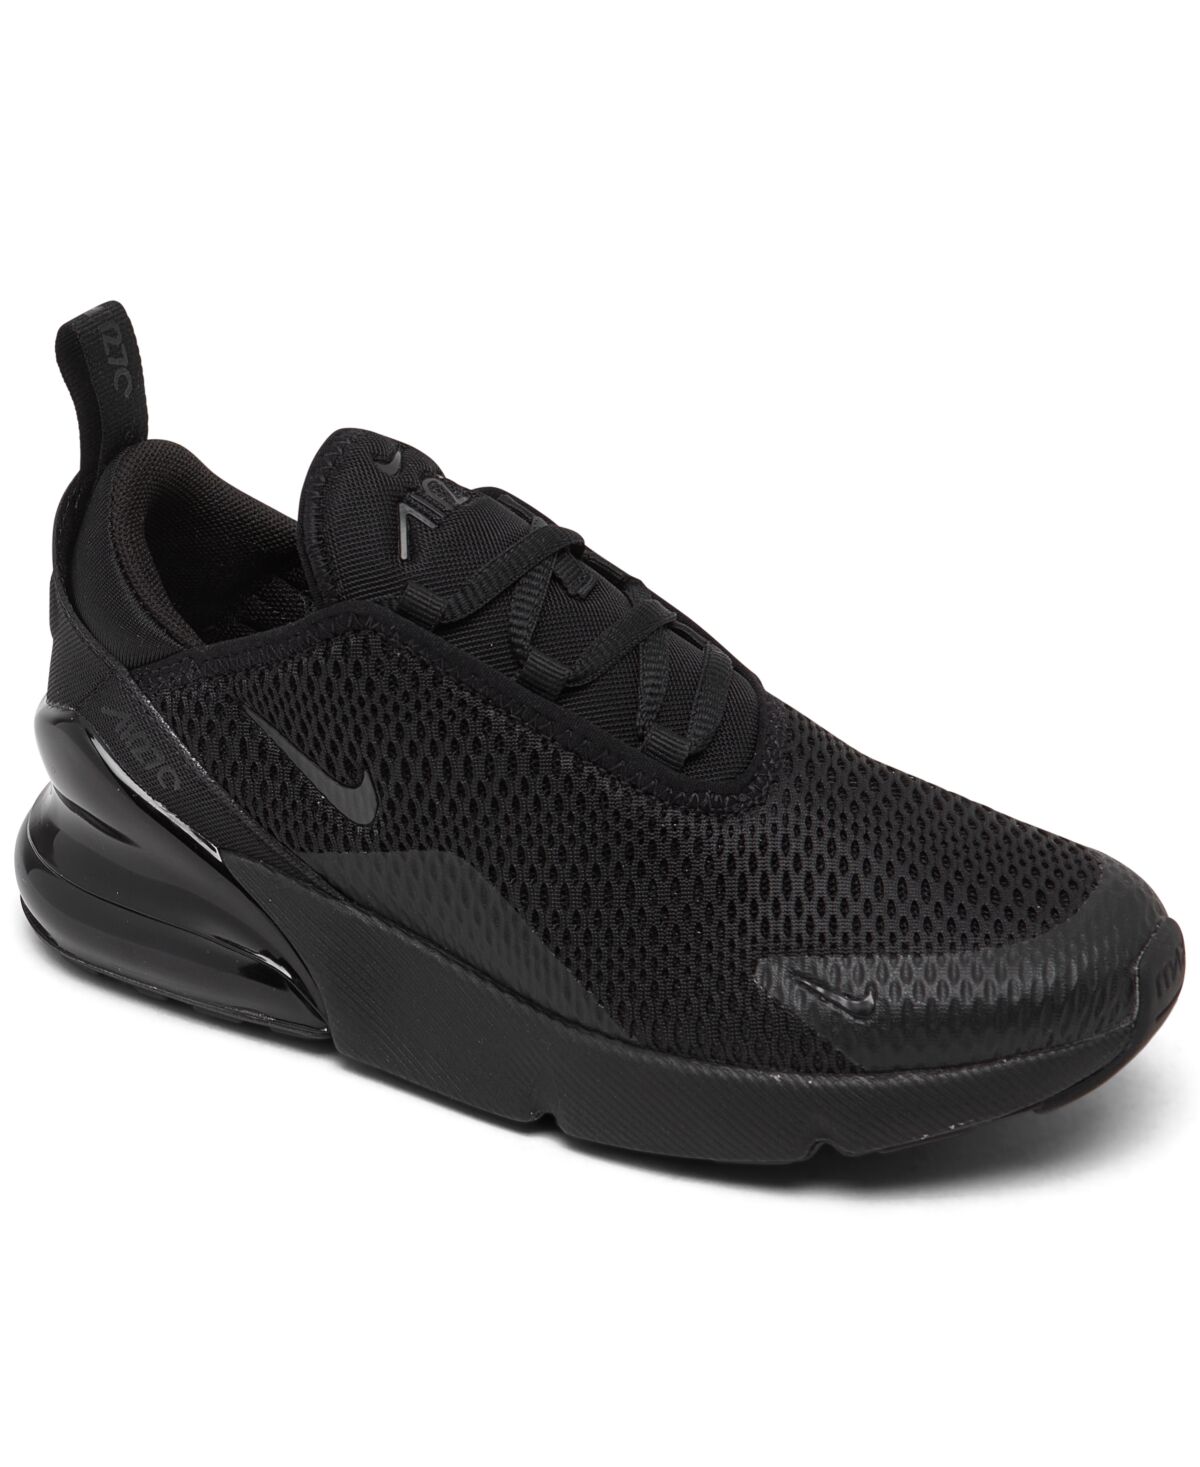 Nike Little Kids Air Max 270 Casual Sneakers from Finish Line - Black